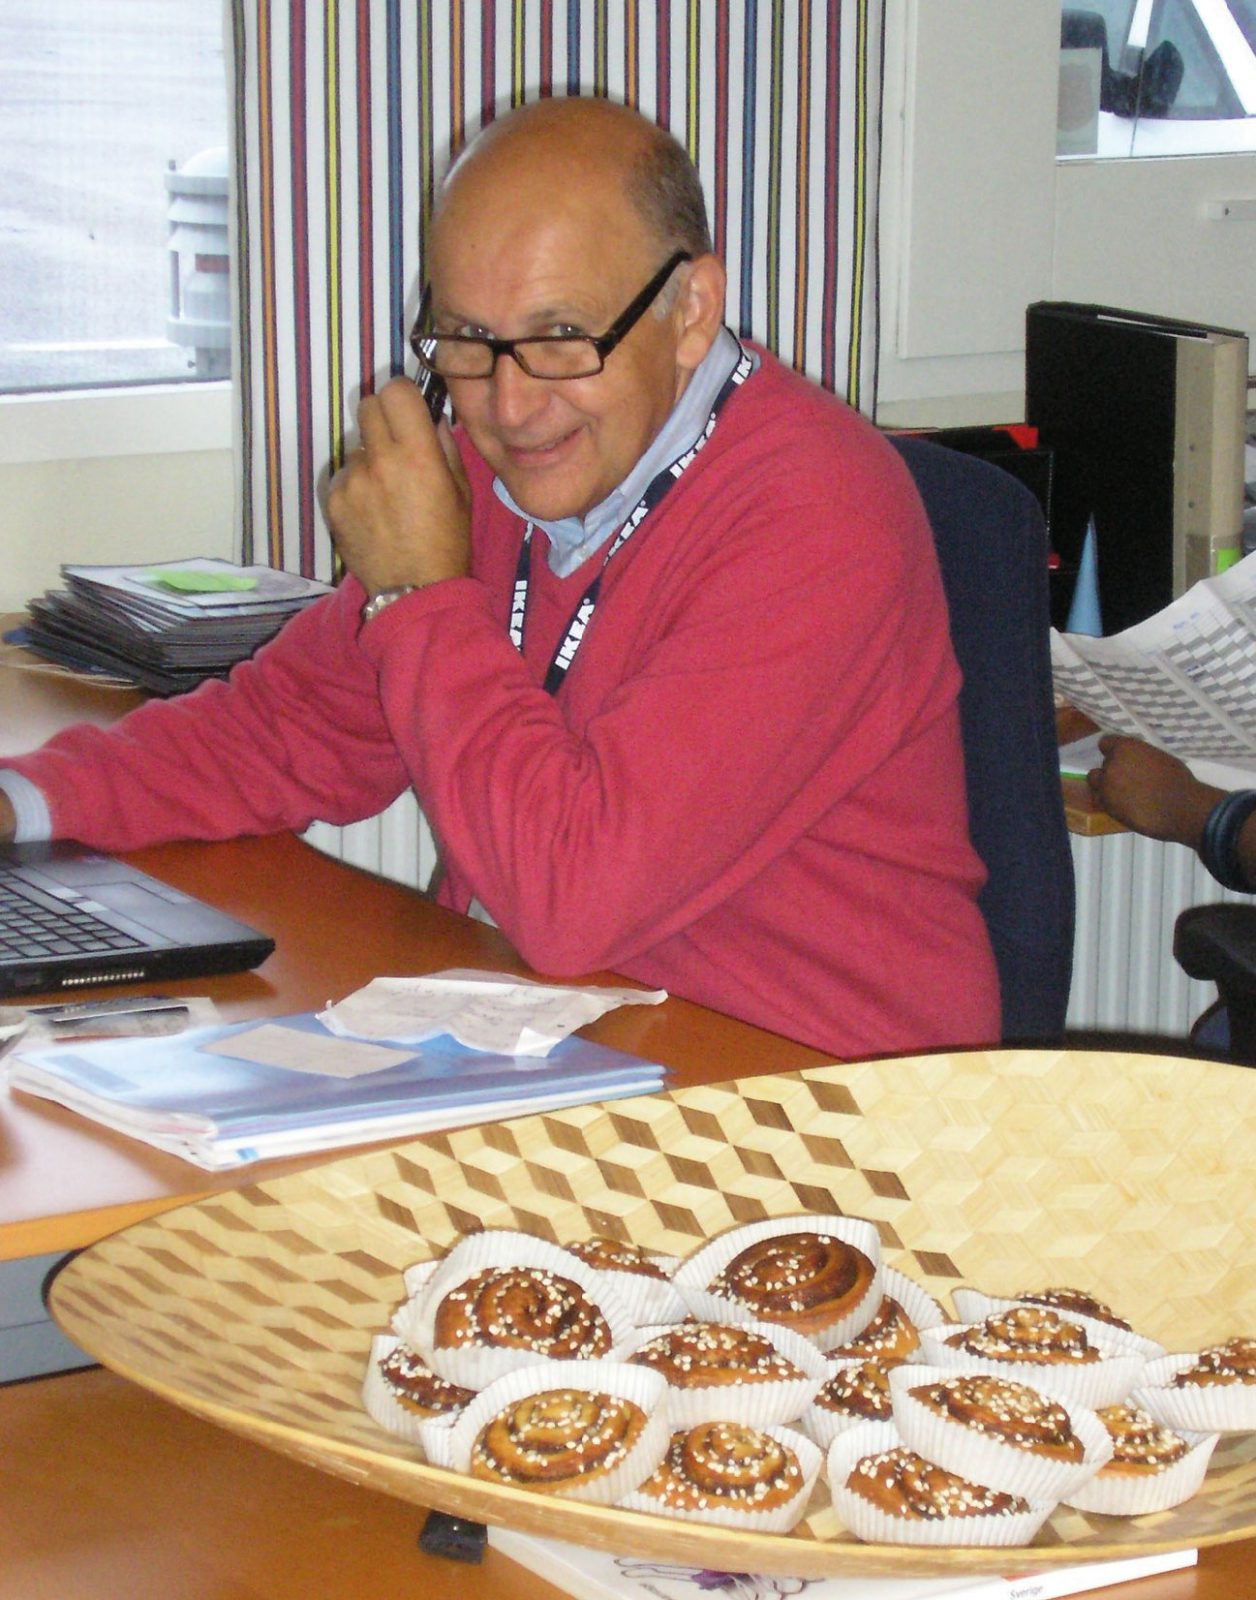 Man wearing glasses and red sweater, Mats Agmén, is on the phone at a desk, in foreground a big basket with cinnamon buns.